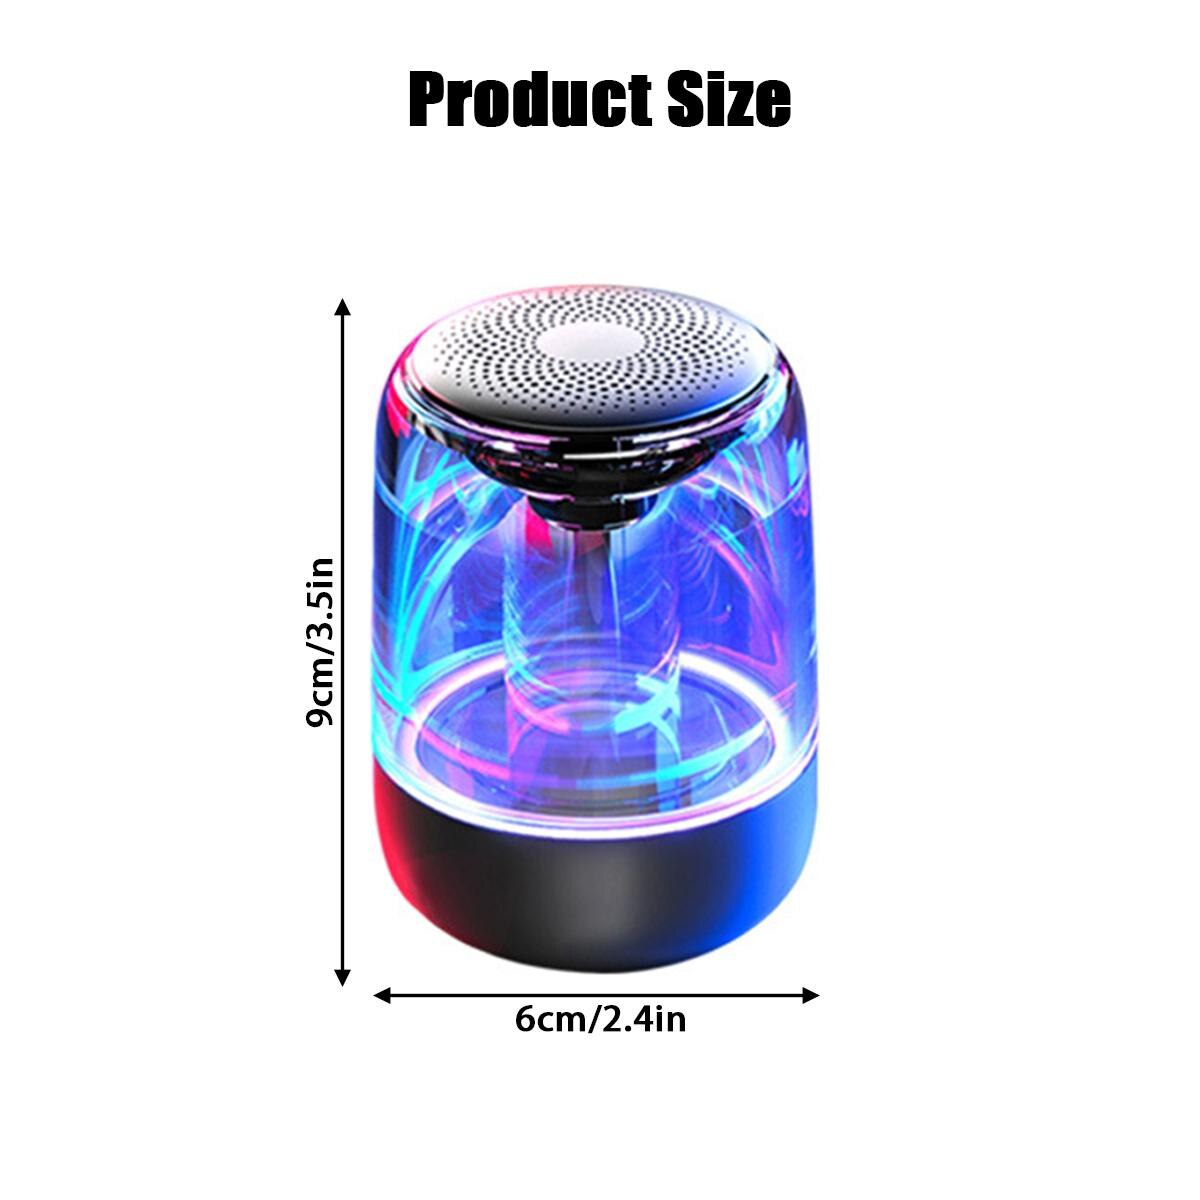 Bluetooth Wireless Speakers Waterproof Stereo Column Portable Subwoofer Speaker Romantic Colorful Light Support TF Card with Mic